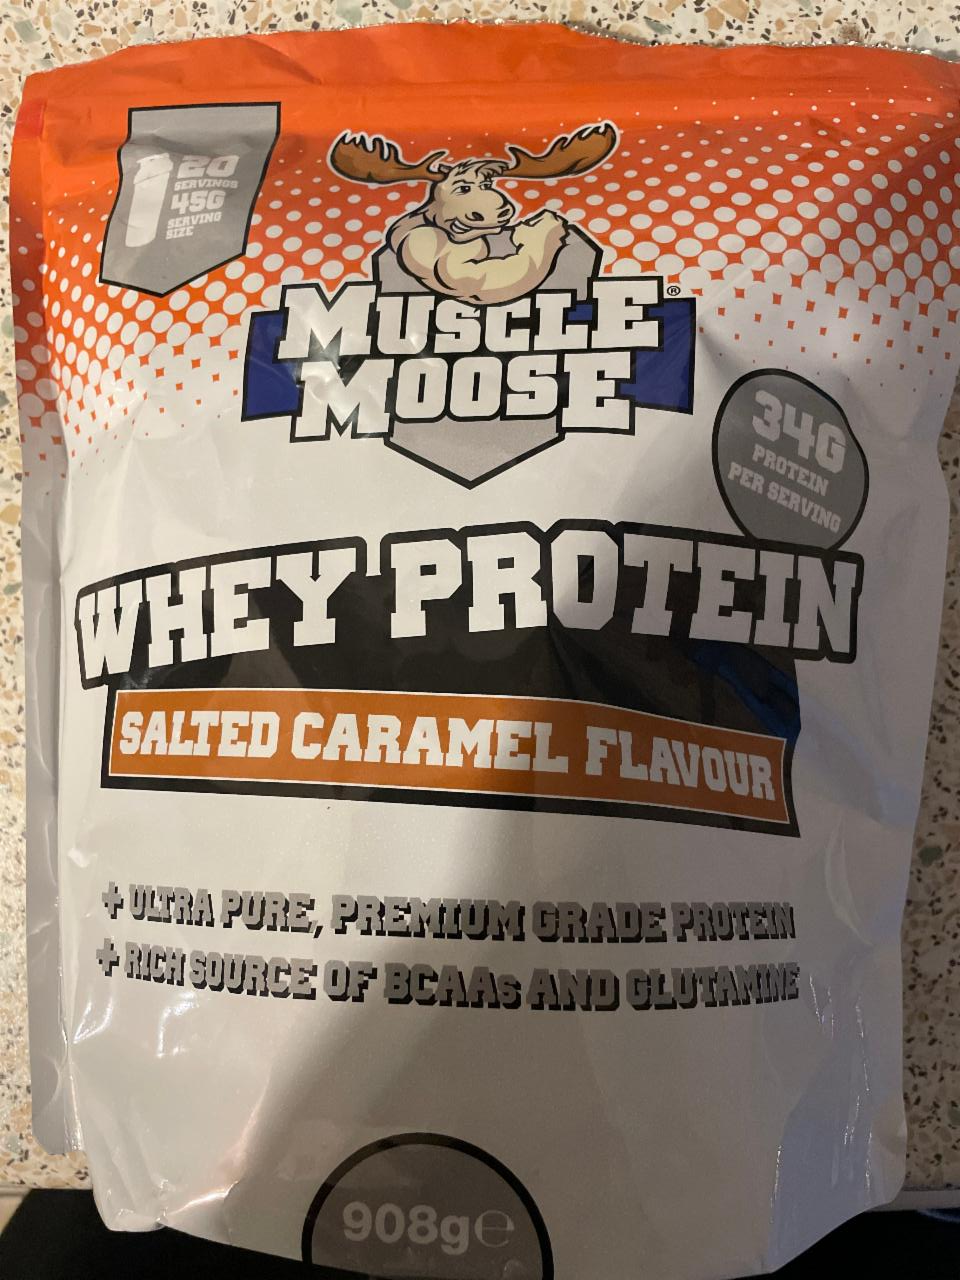 Zdjęcia - Whey Protein Salted Caramel Muscle Moose